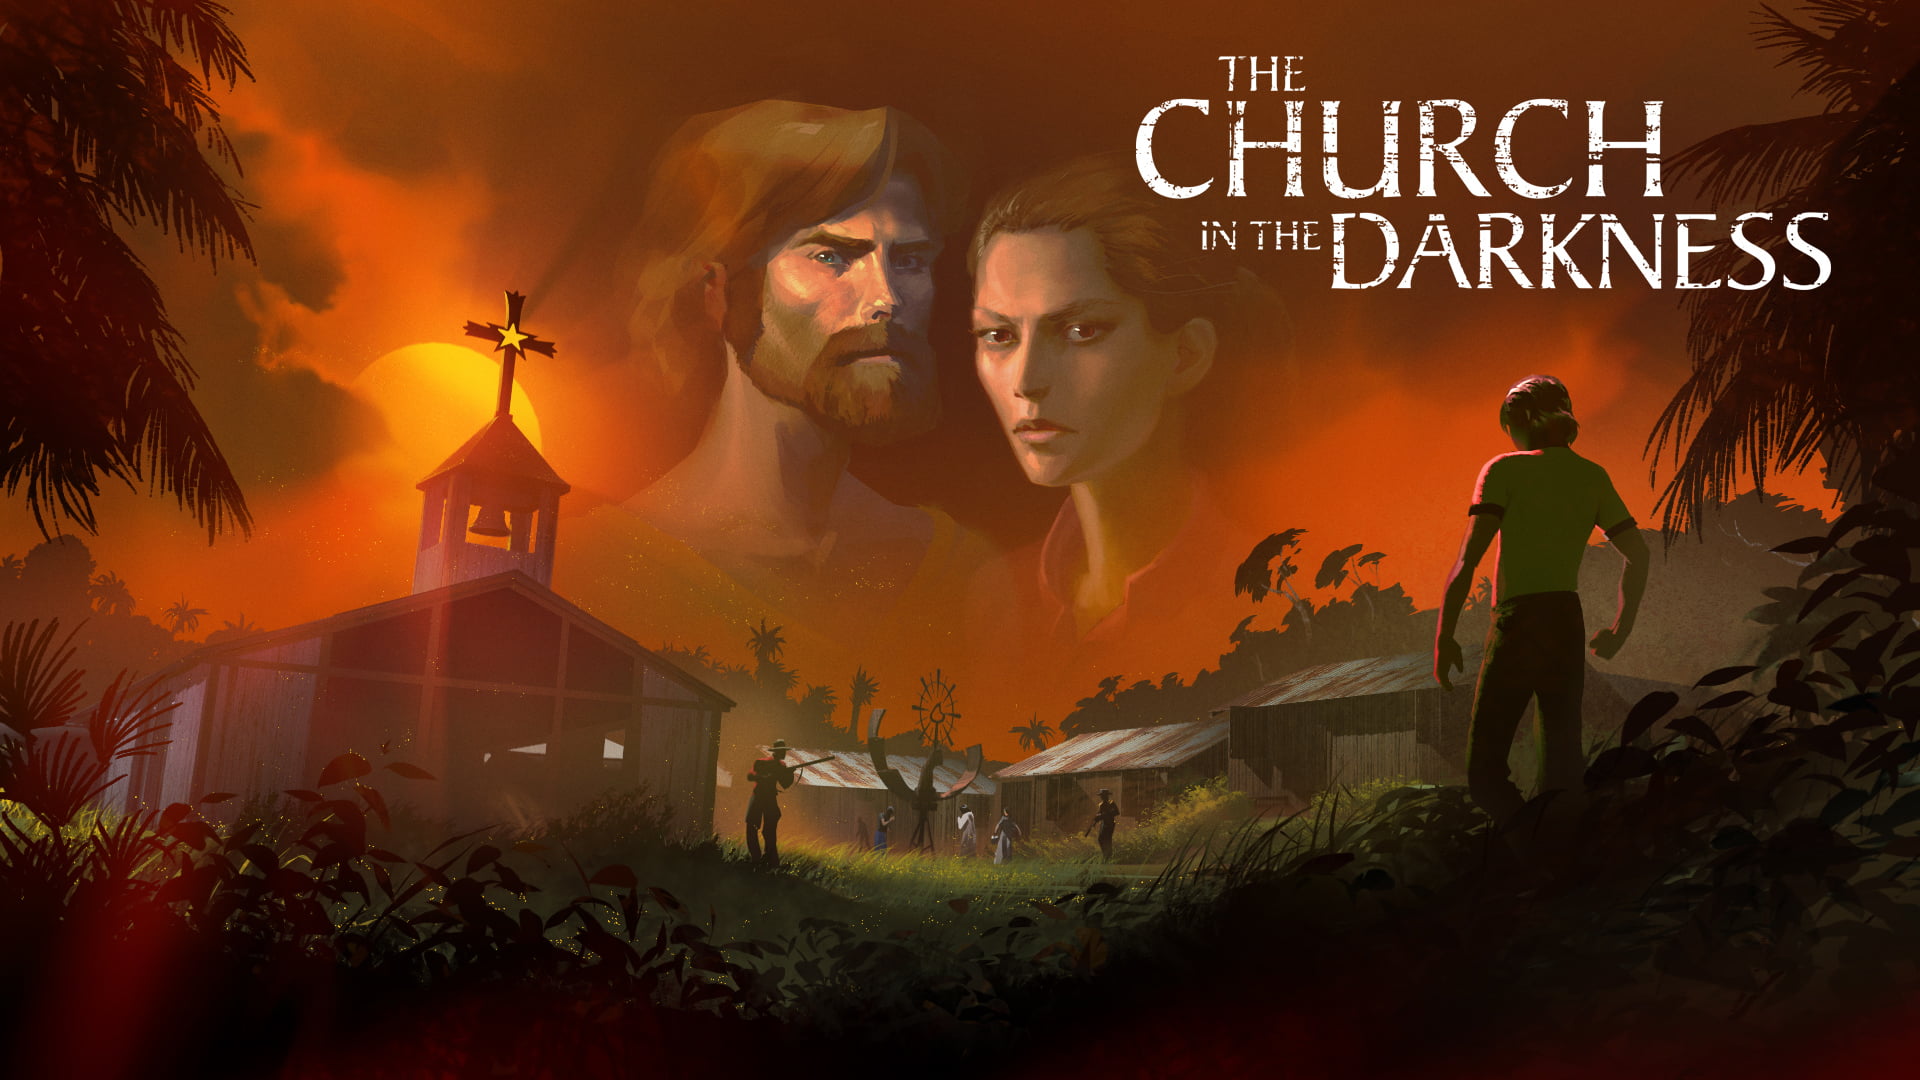 The wonderful 101 | the church in the darkness - review | the church in the darkness | notícias